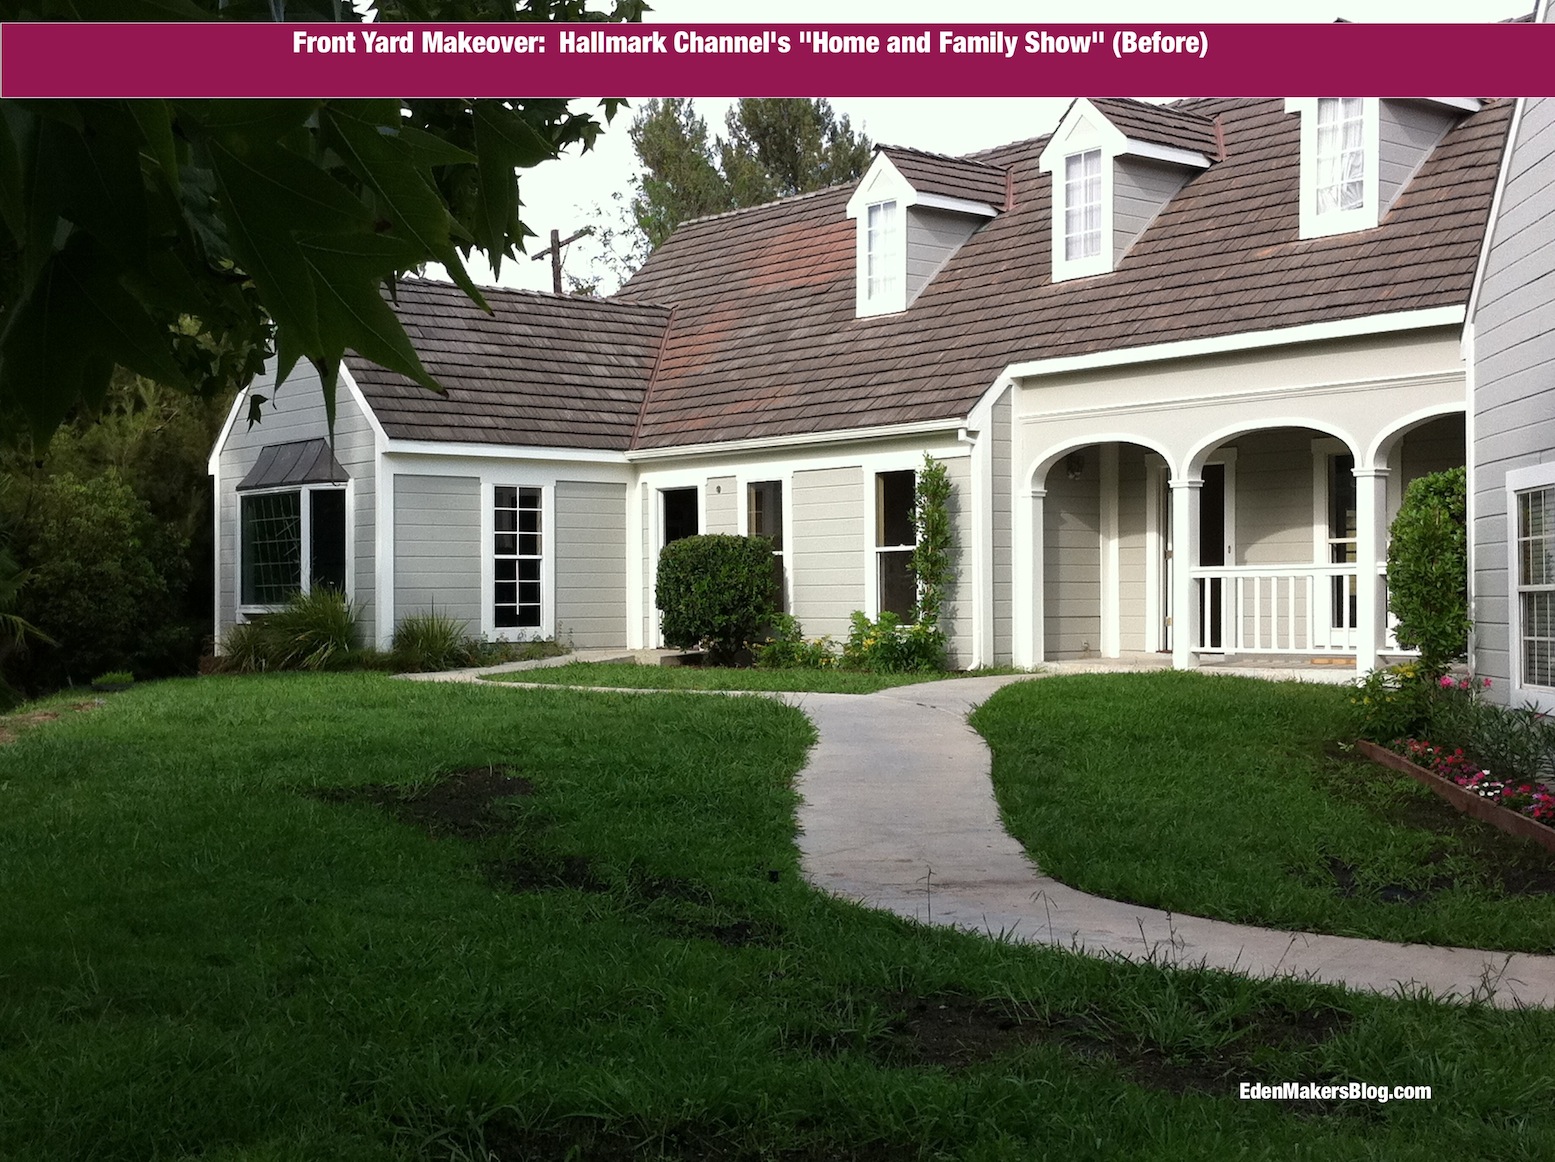 Hallmark-Home-and-Family-Show-Front-Yard-Before-Makeover-Shirley-Bovshow